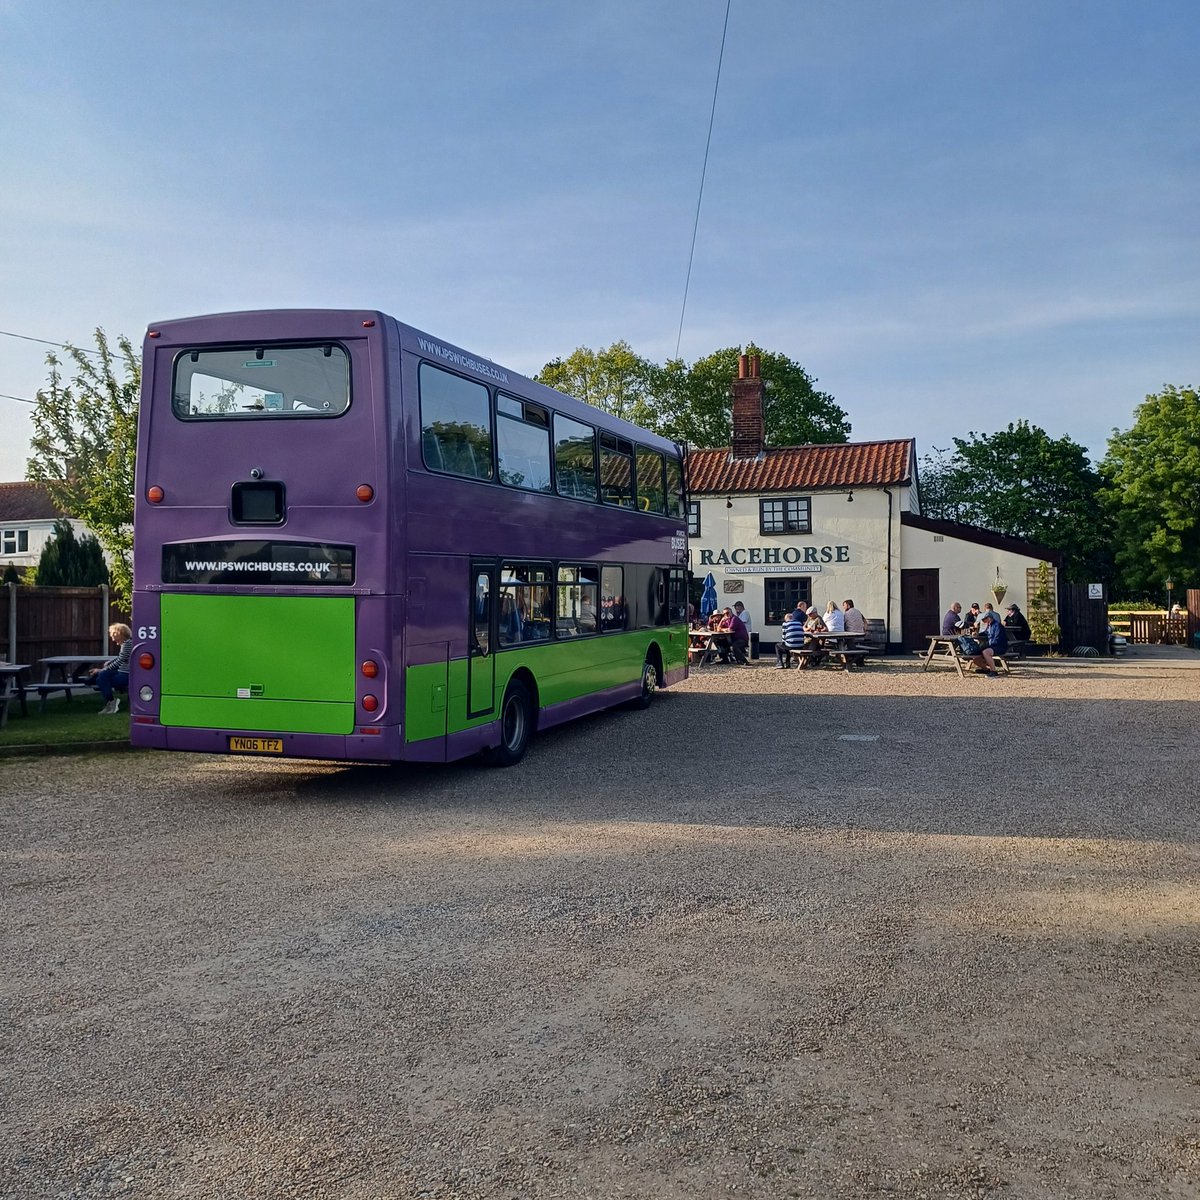 A busy day at work and even busier as @WRacehorse was paid a visit by 55 lovely beer drinking folks from @CAMRA_Official Ipswich branch on their Real Ale Runabouts. We thought a minibus was coming 🤣🤣